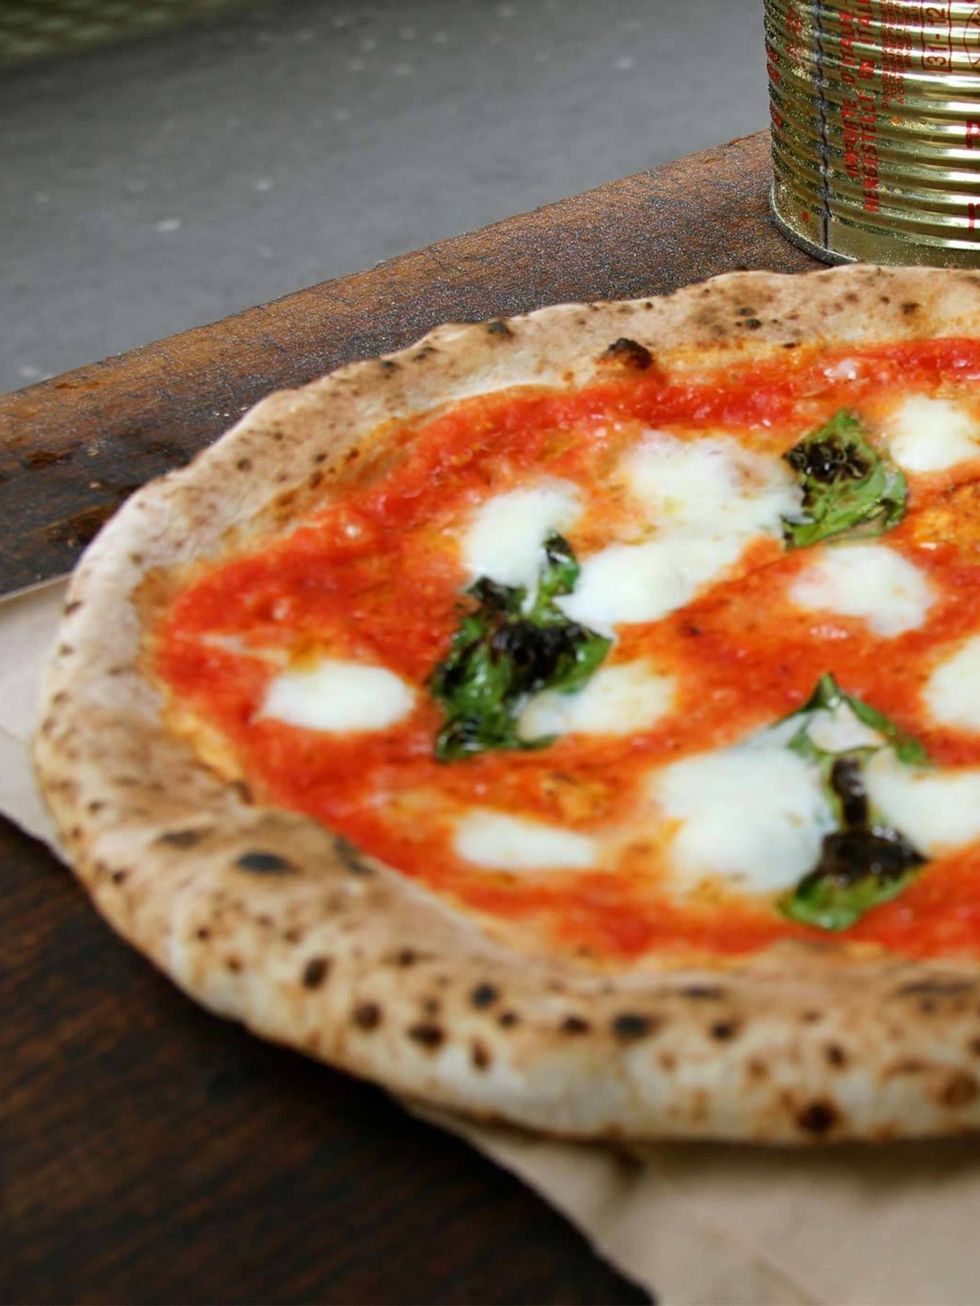 <p>Soho street food favourites Pizza Pilgrims will be launching their own permanent pizzeria at 11 Dean Street this July. Its due to open mid month and will serve Pizza Pilgrims signature Neapolitan pizzas. Apparently, they are working as fast as they c